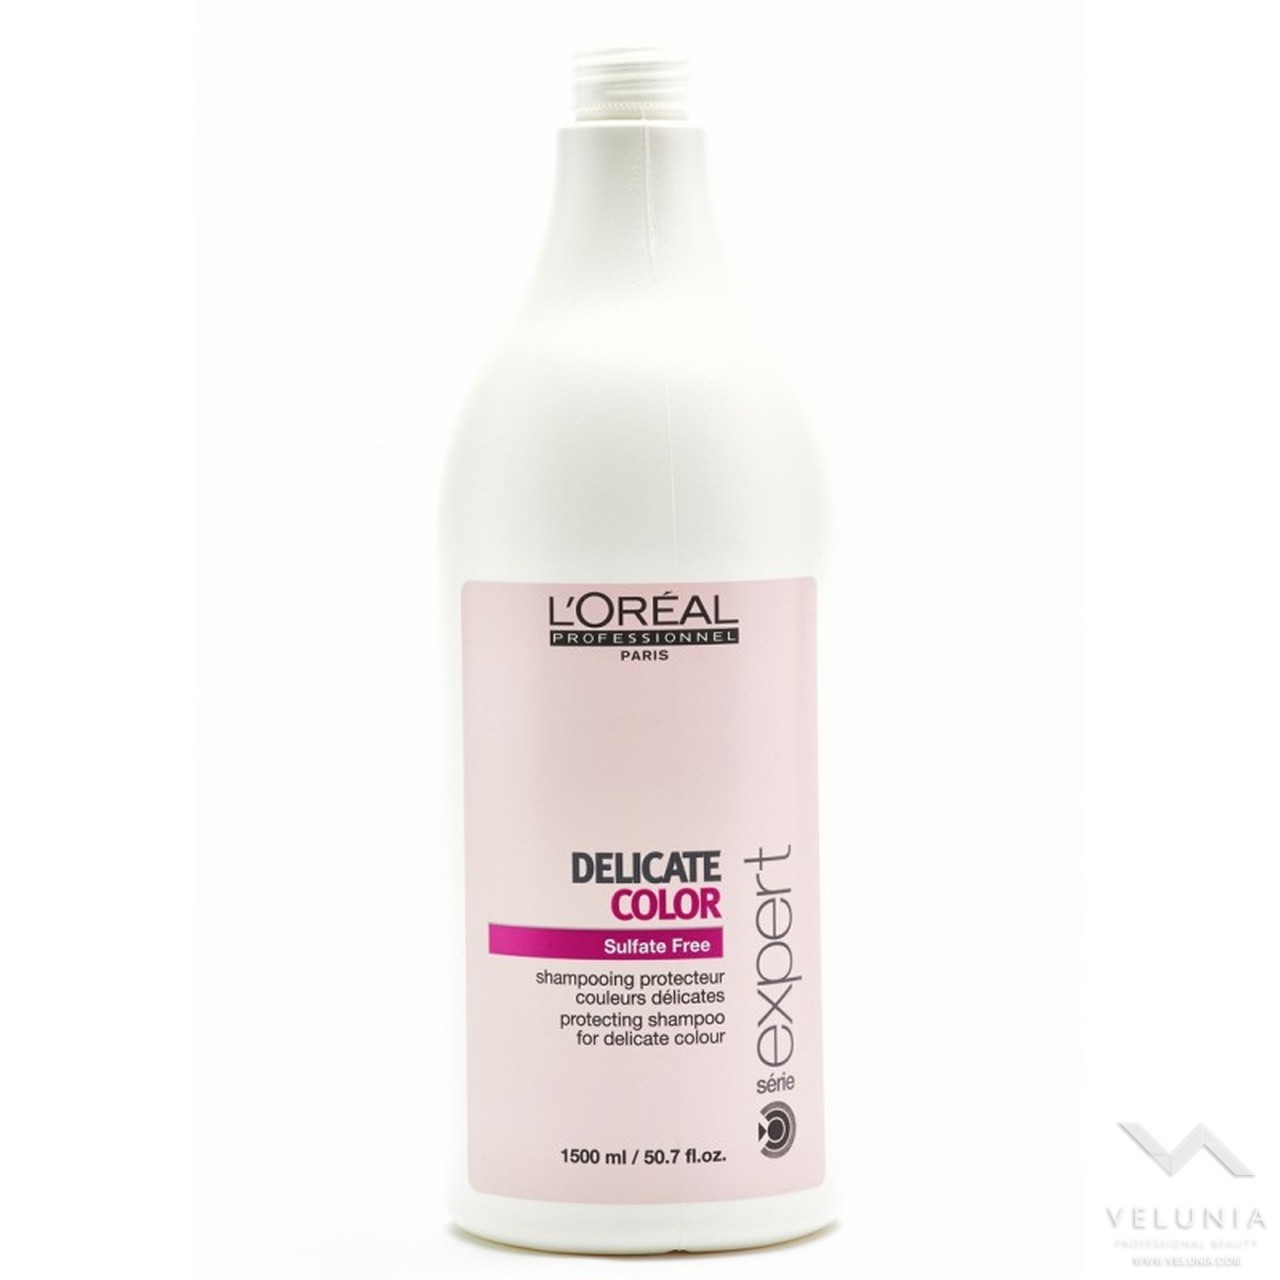 L'Oreal Expert Delicate Color 1500ml 1